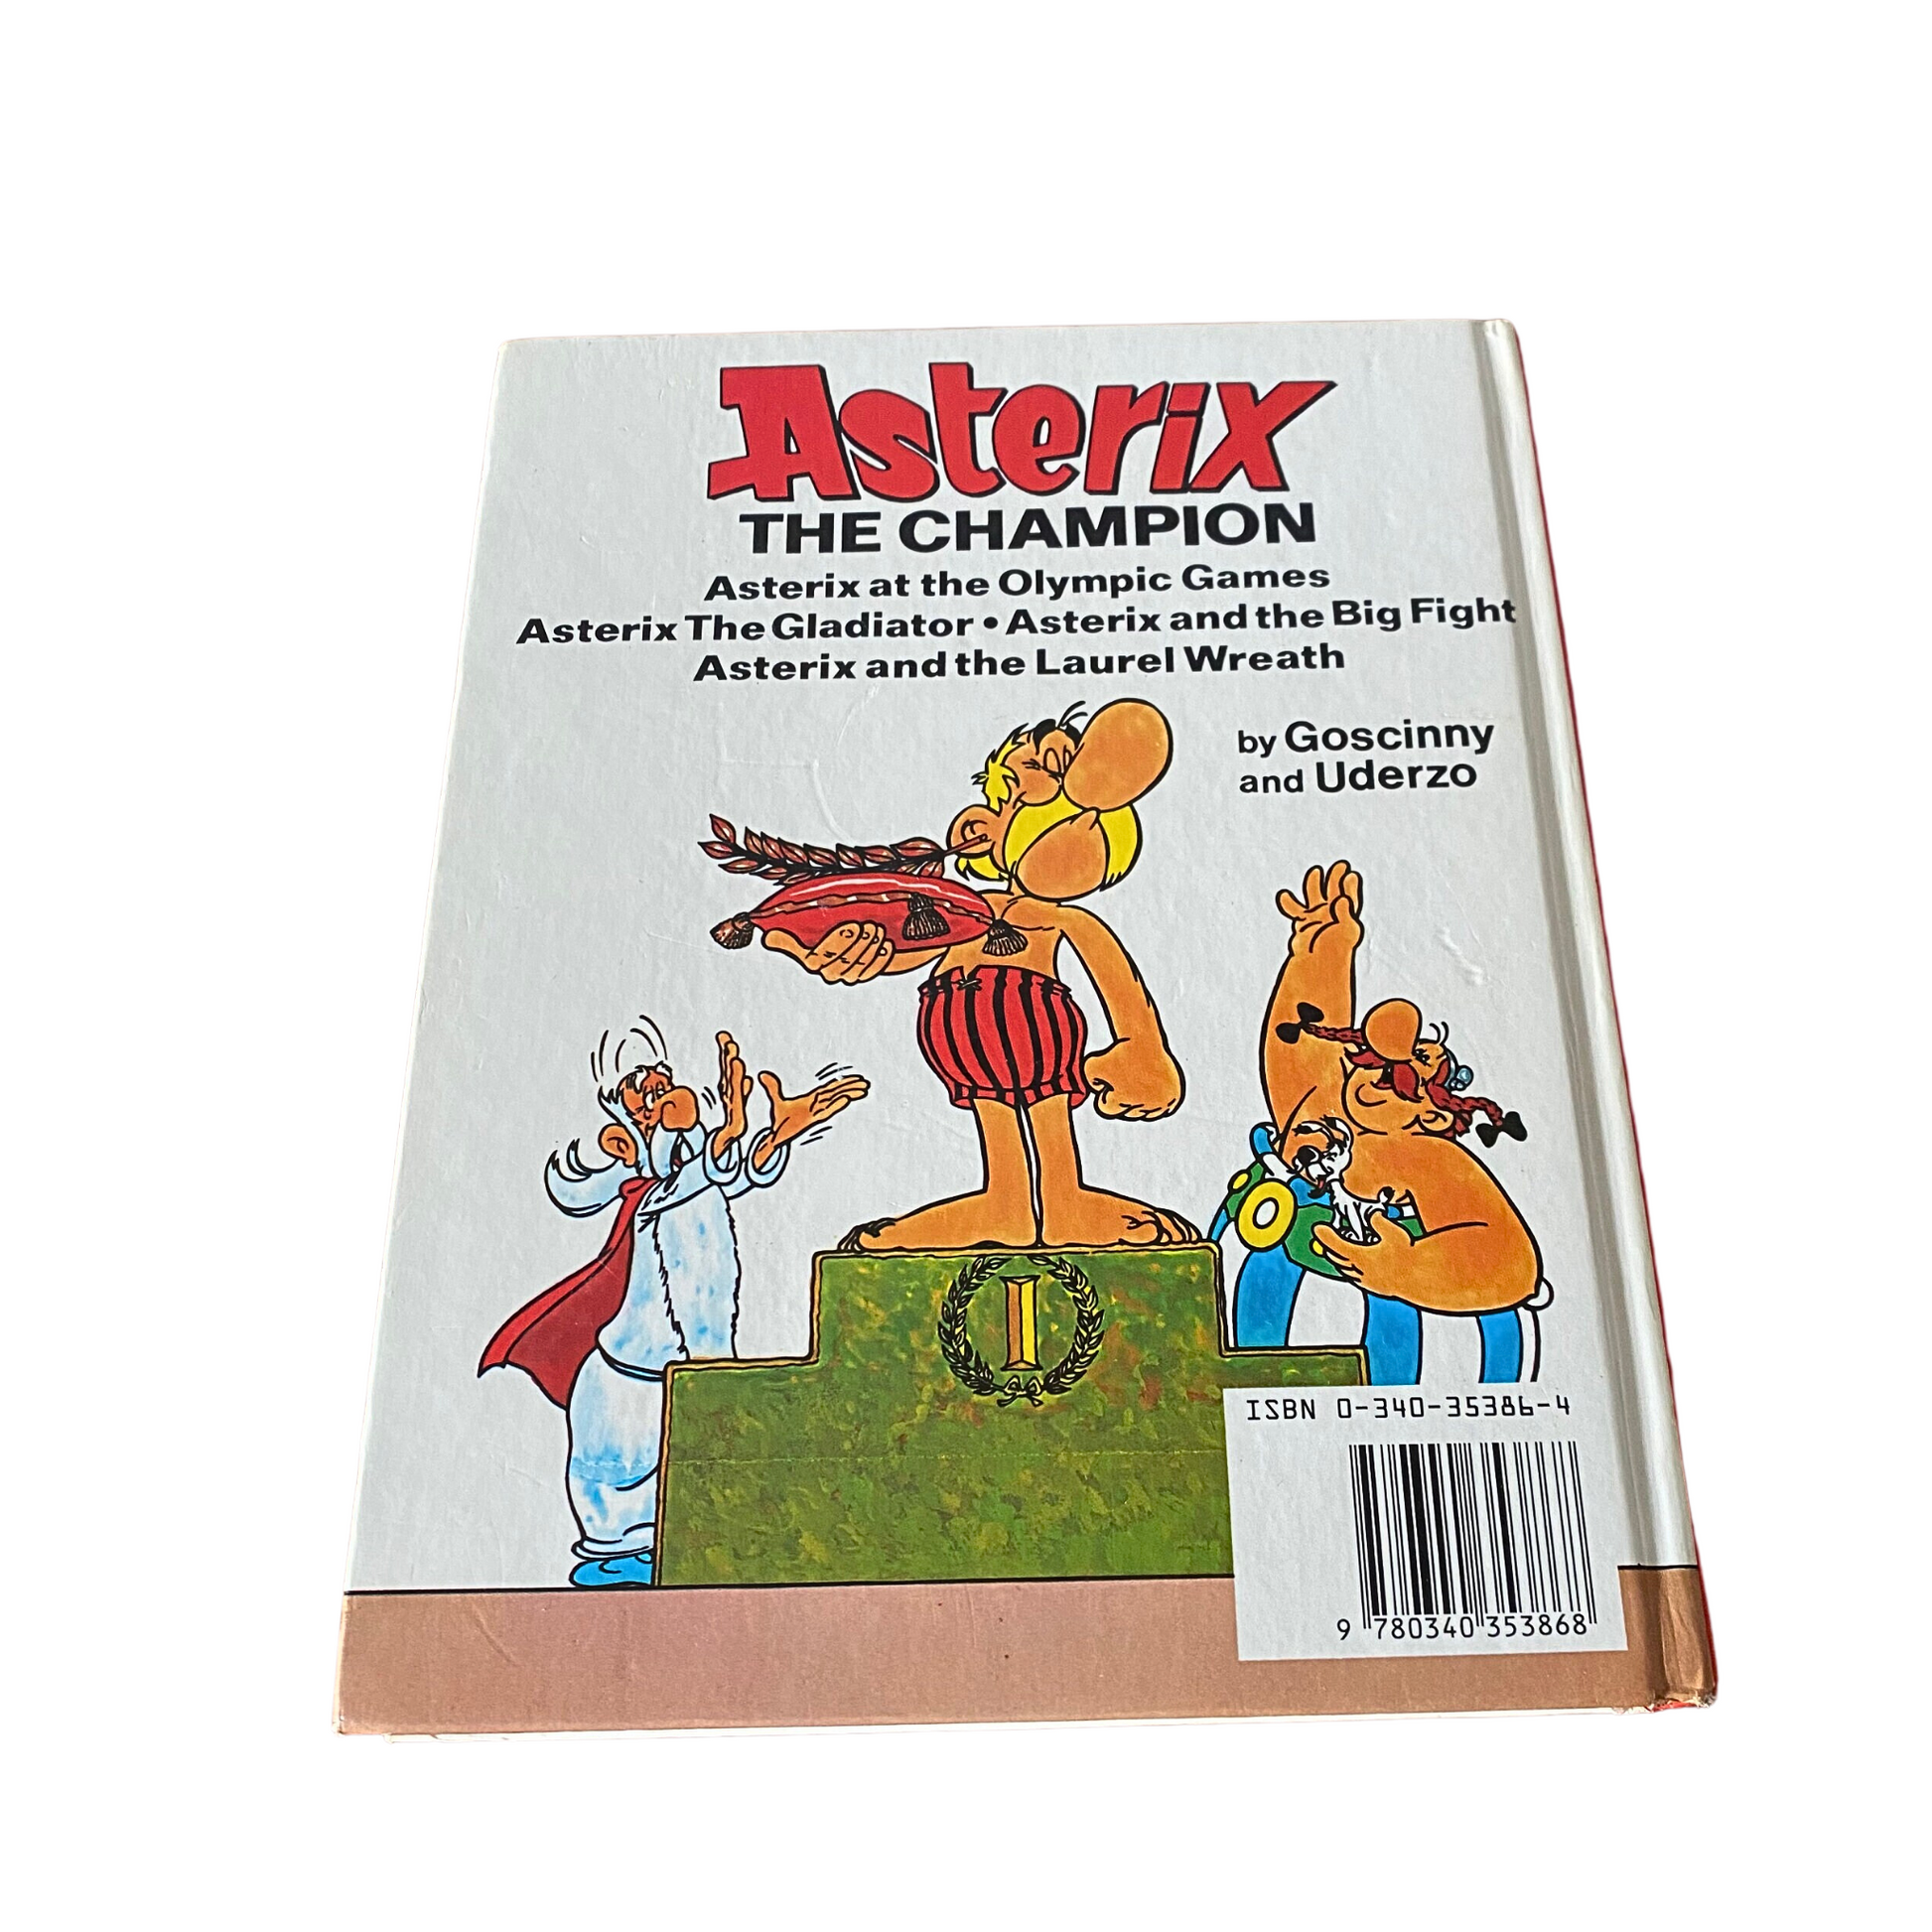 Asterix the Champion vintage hardback story collect book - great gift idea 